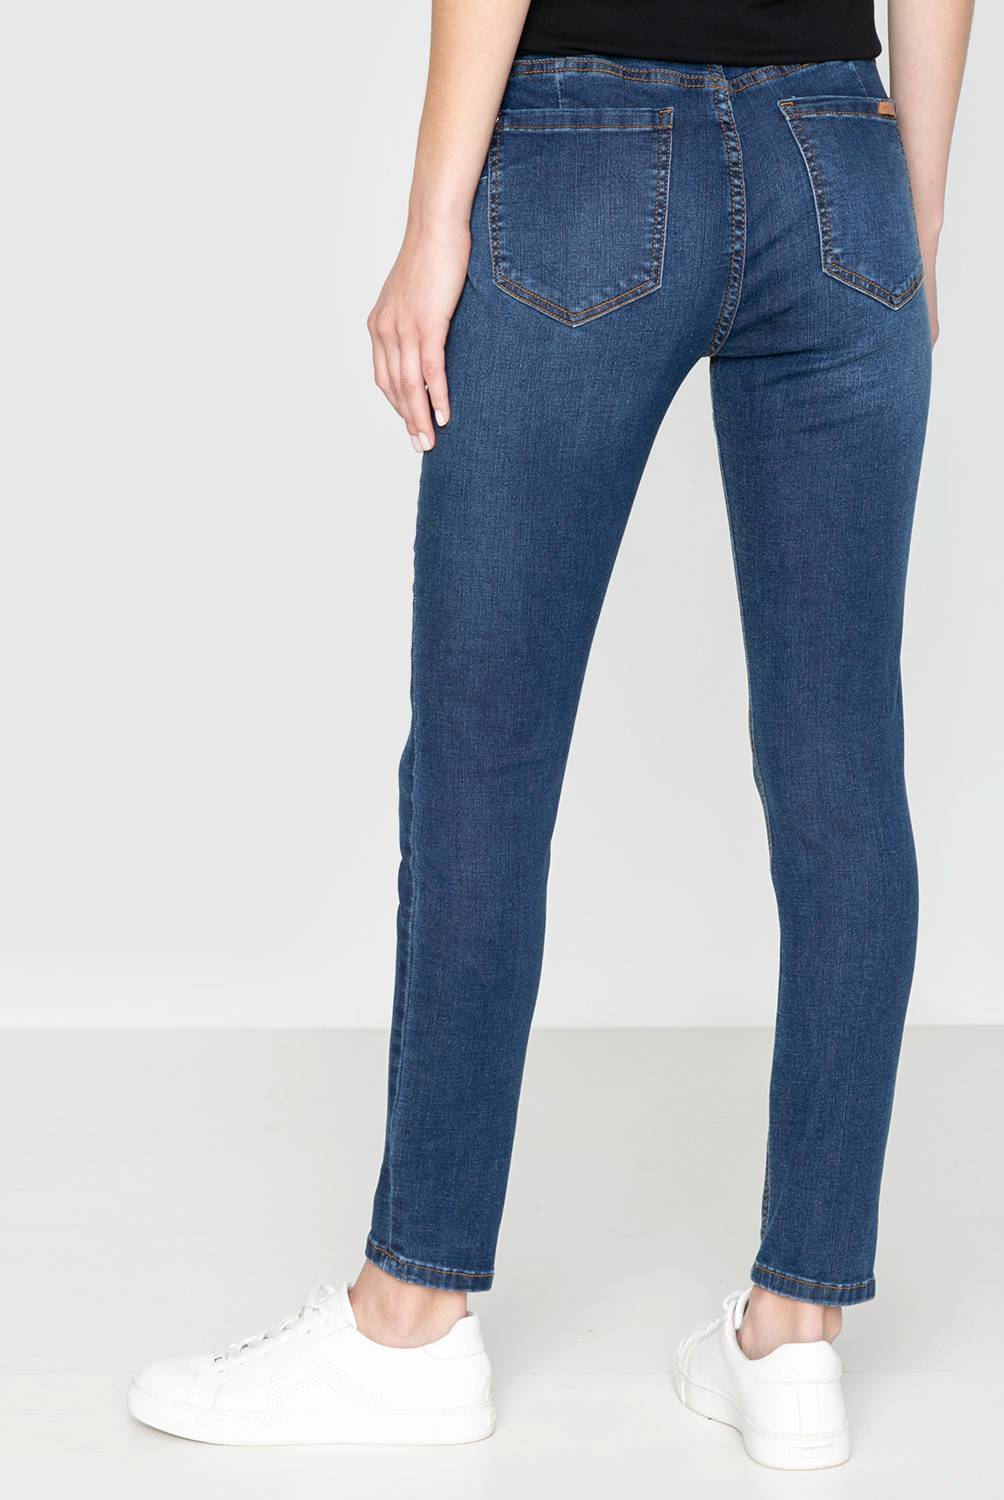 APOLOGY - Jeans Skinny Mujer